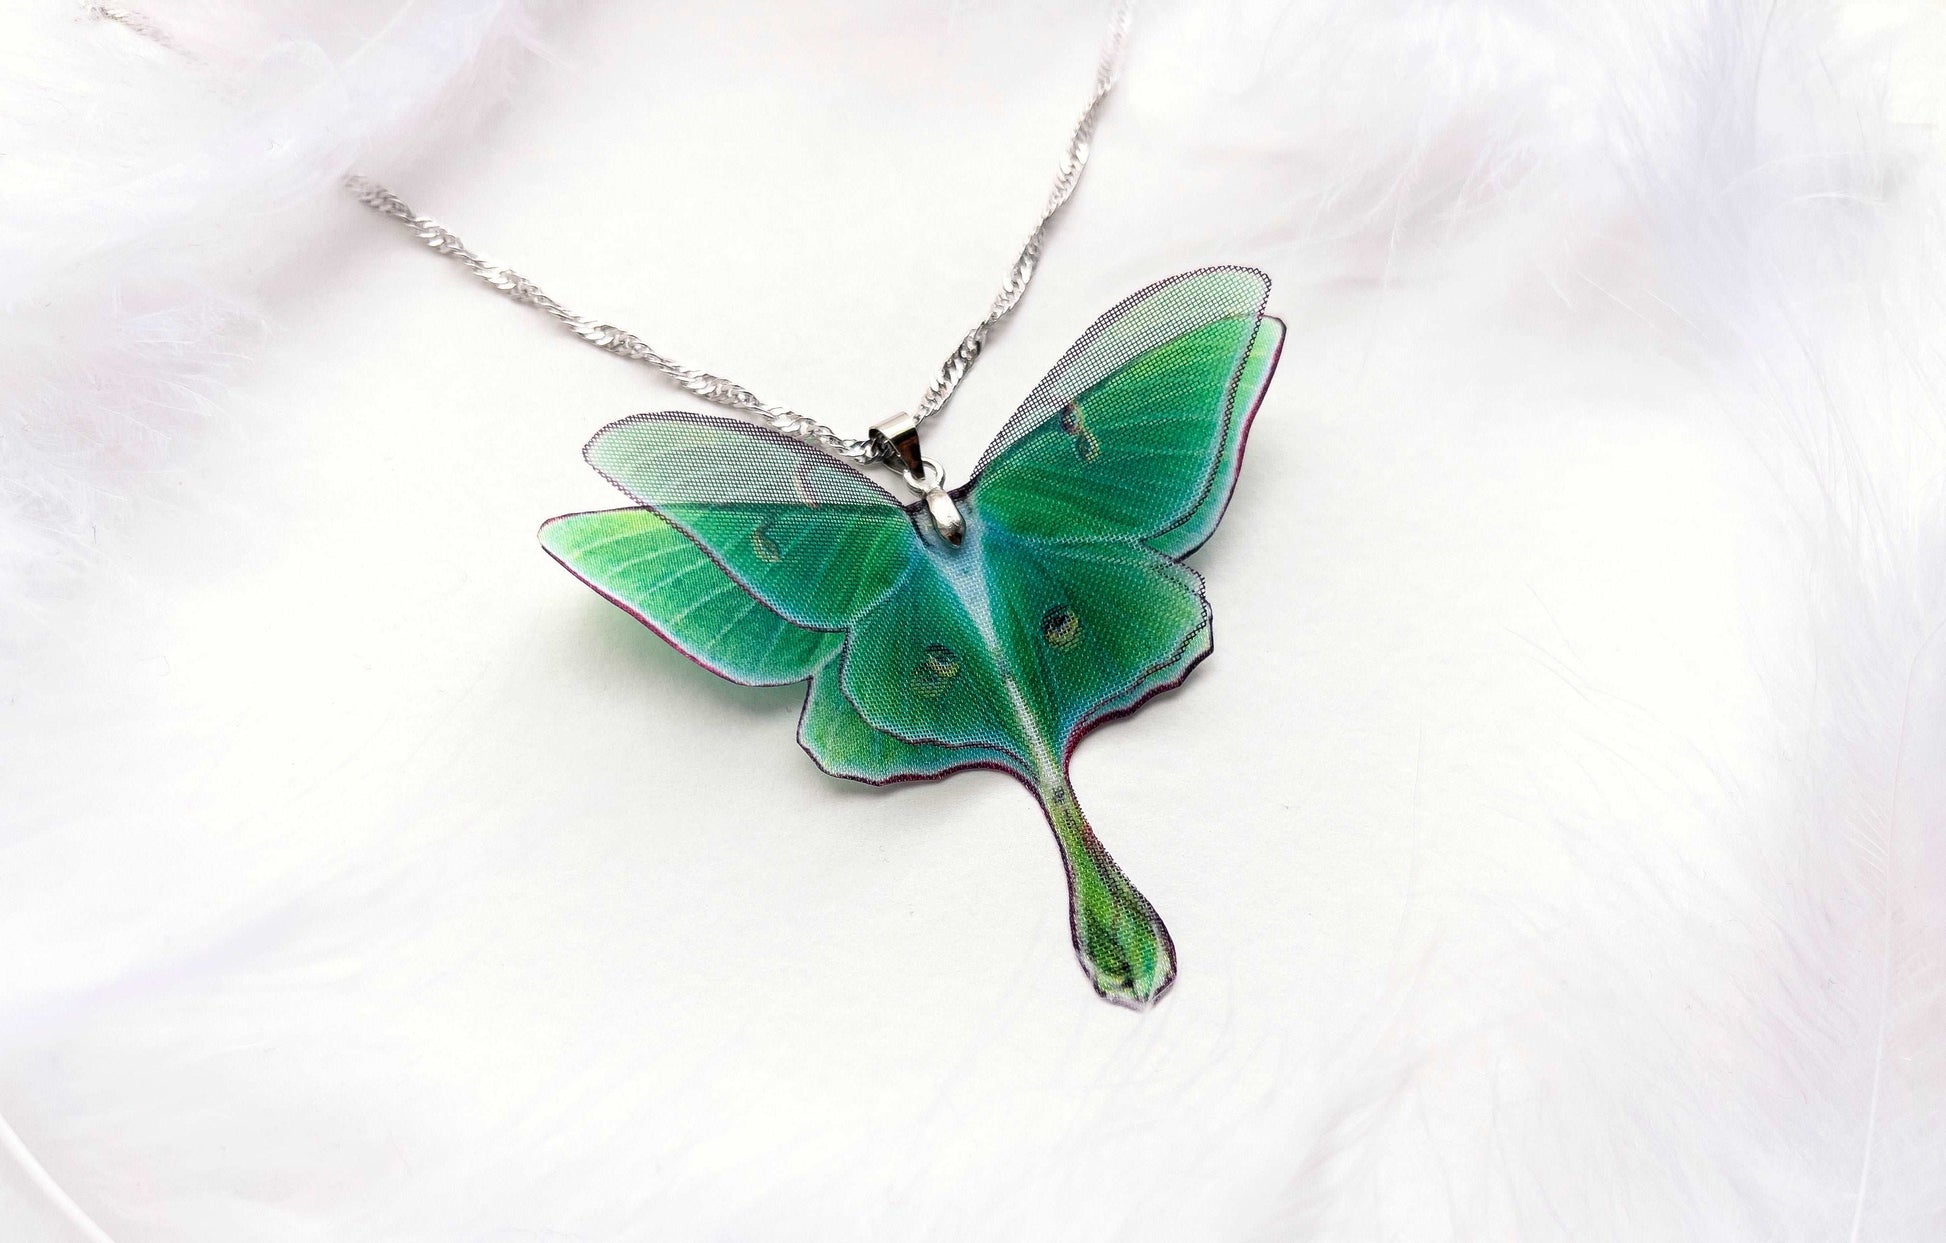 Green Lunar Moth Pendant with chain on a nature-inspired background - Show off your love for the environment with this eco-friendly jewelry piece